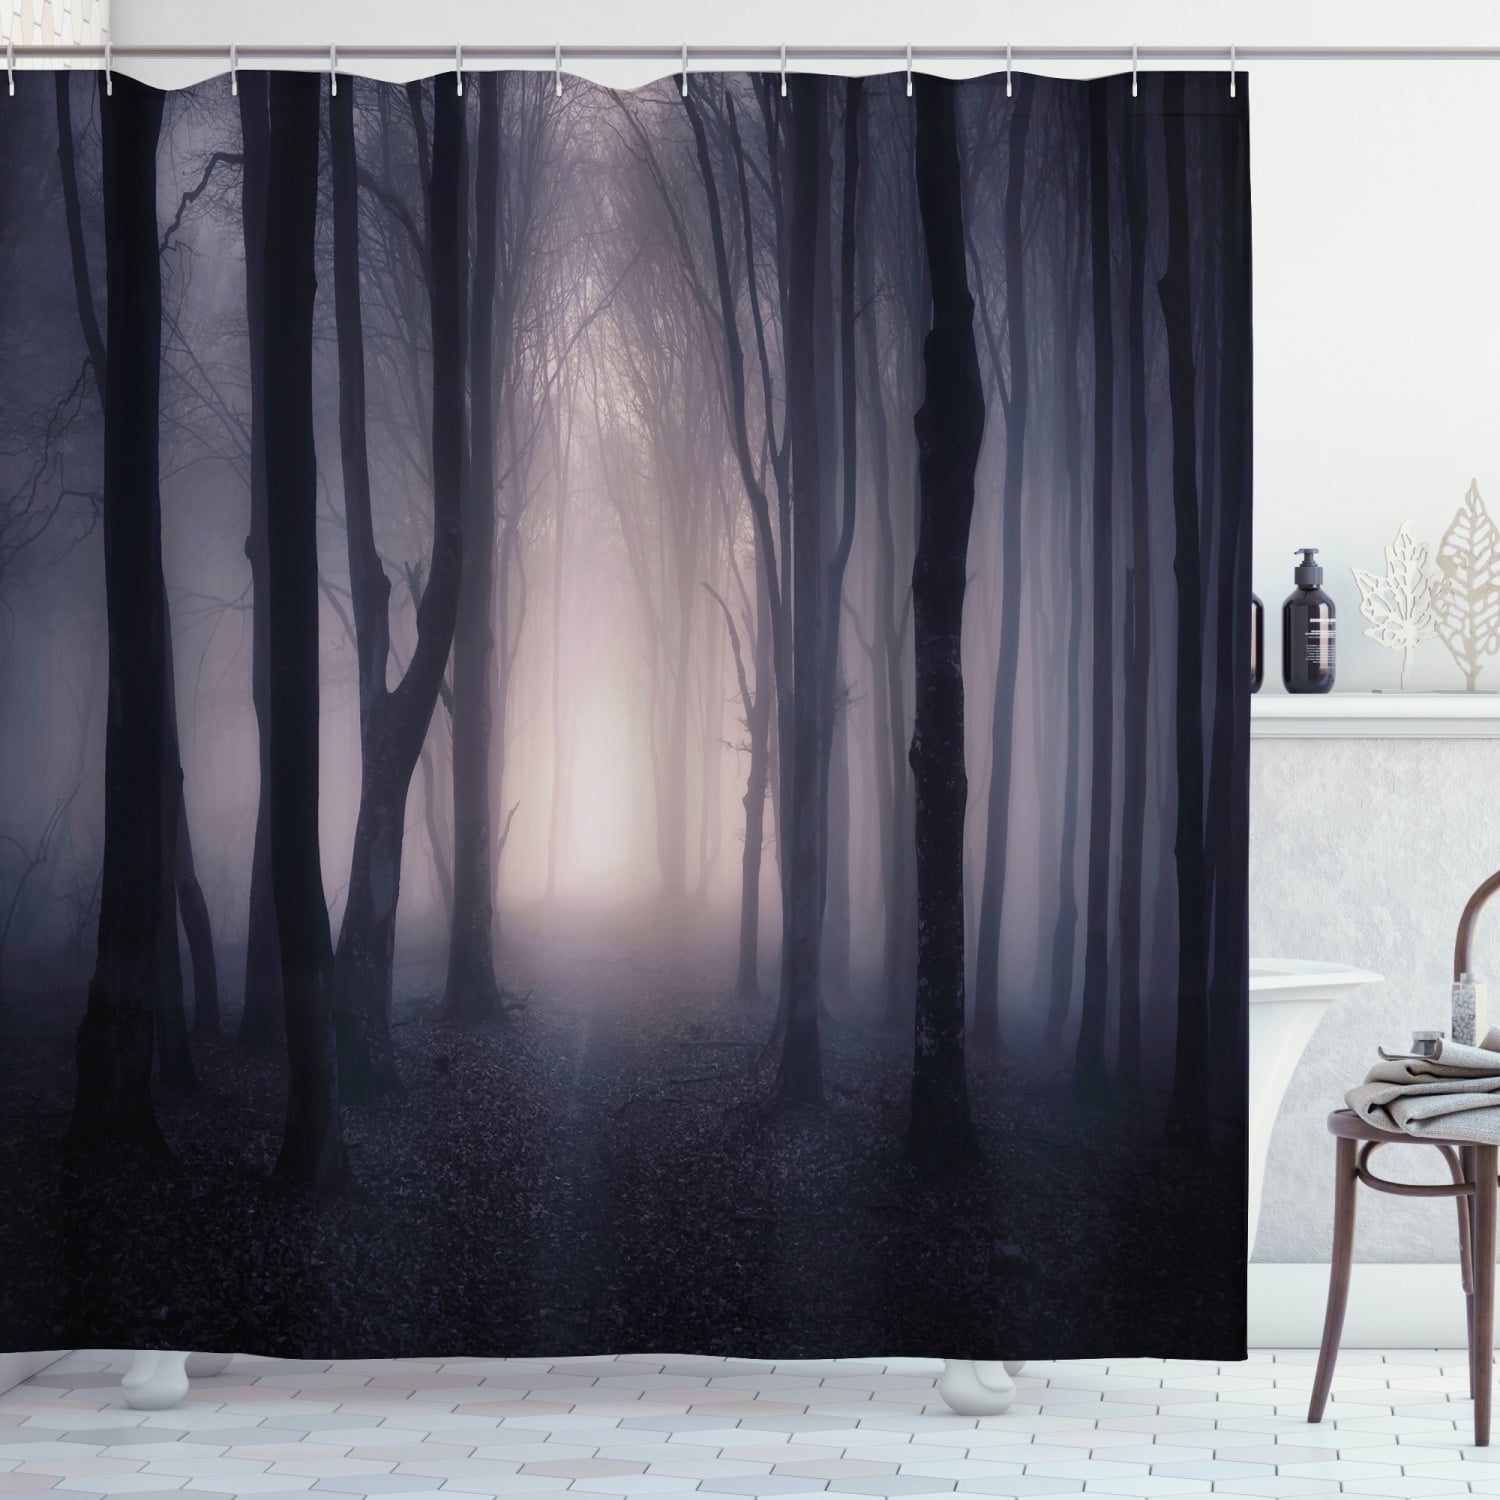 Black and Gray Gothic Forest Bathroom Waterproof Fabric Shower Curtain &12 Hooks 